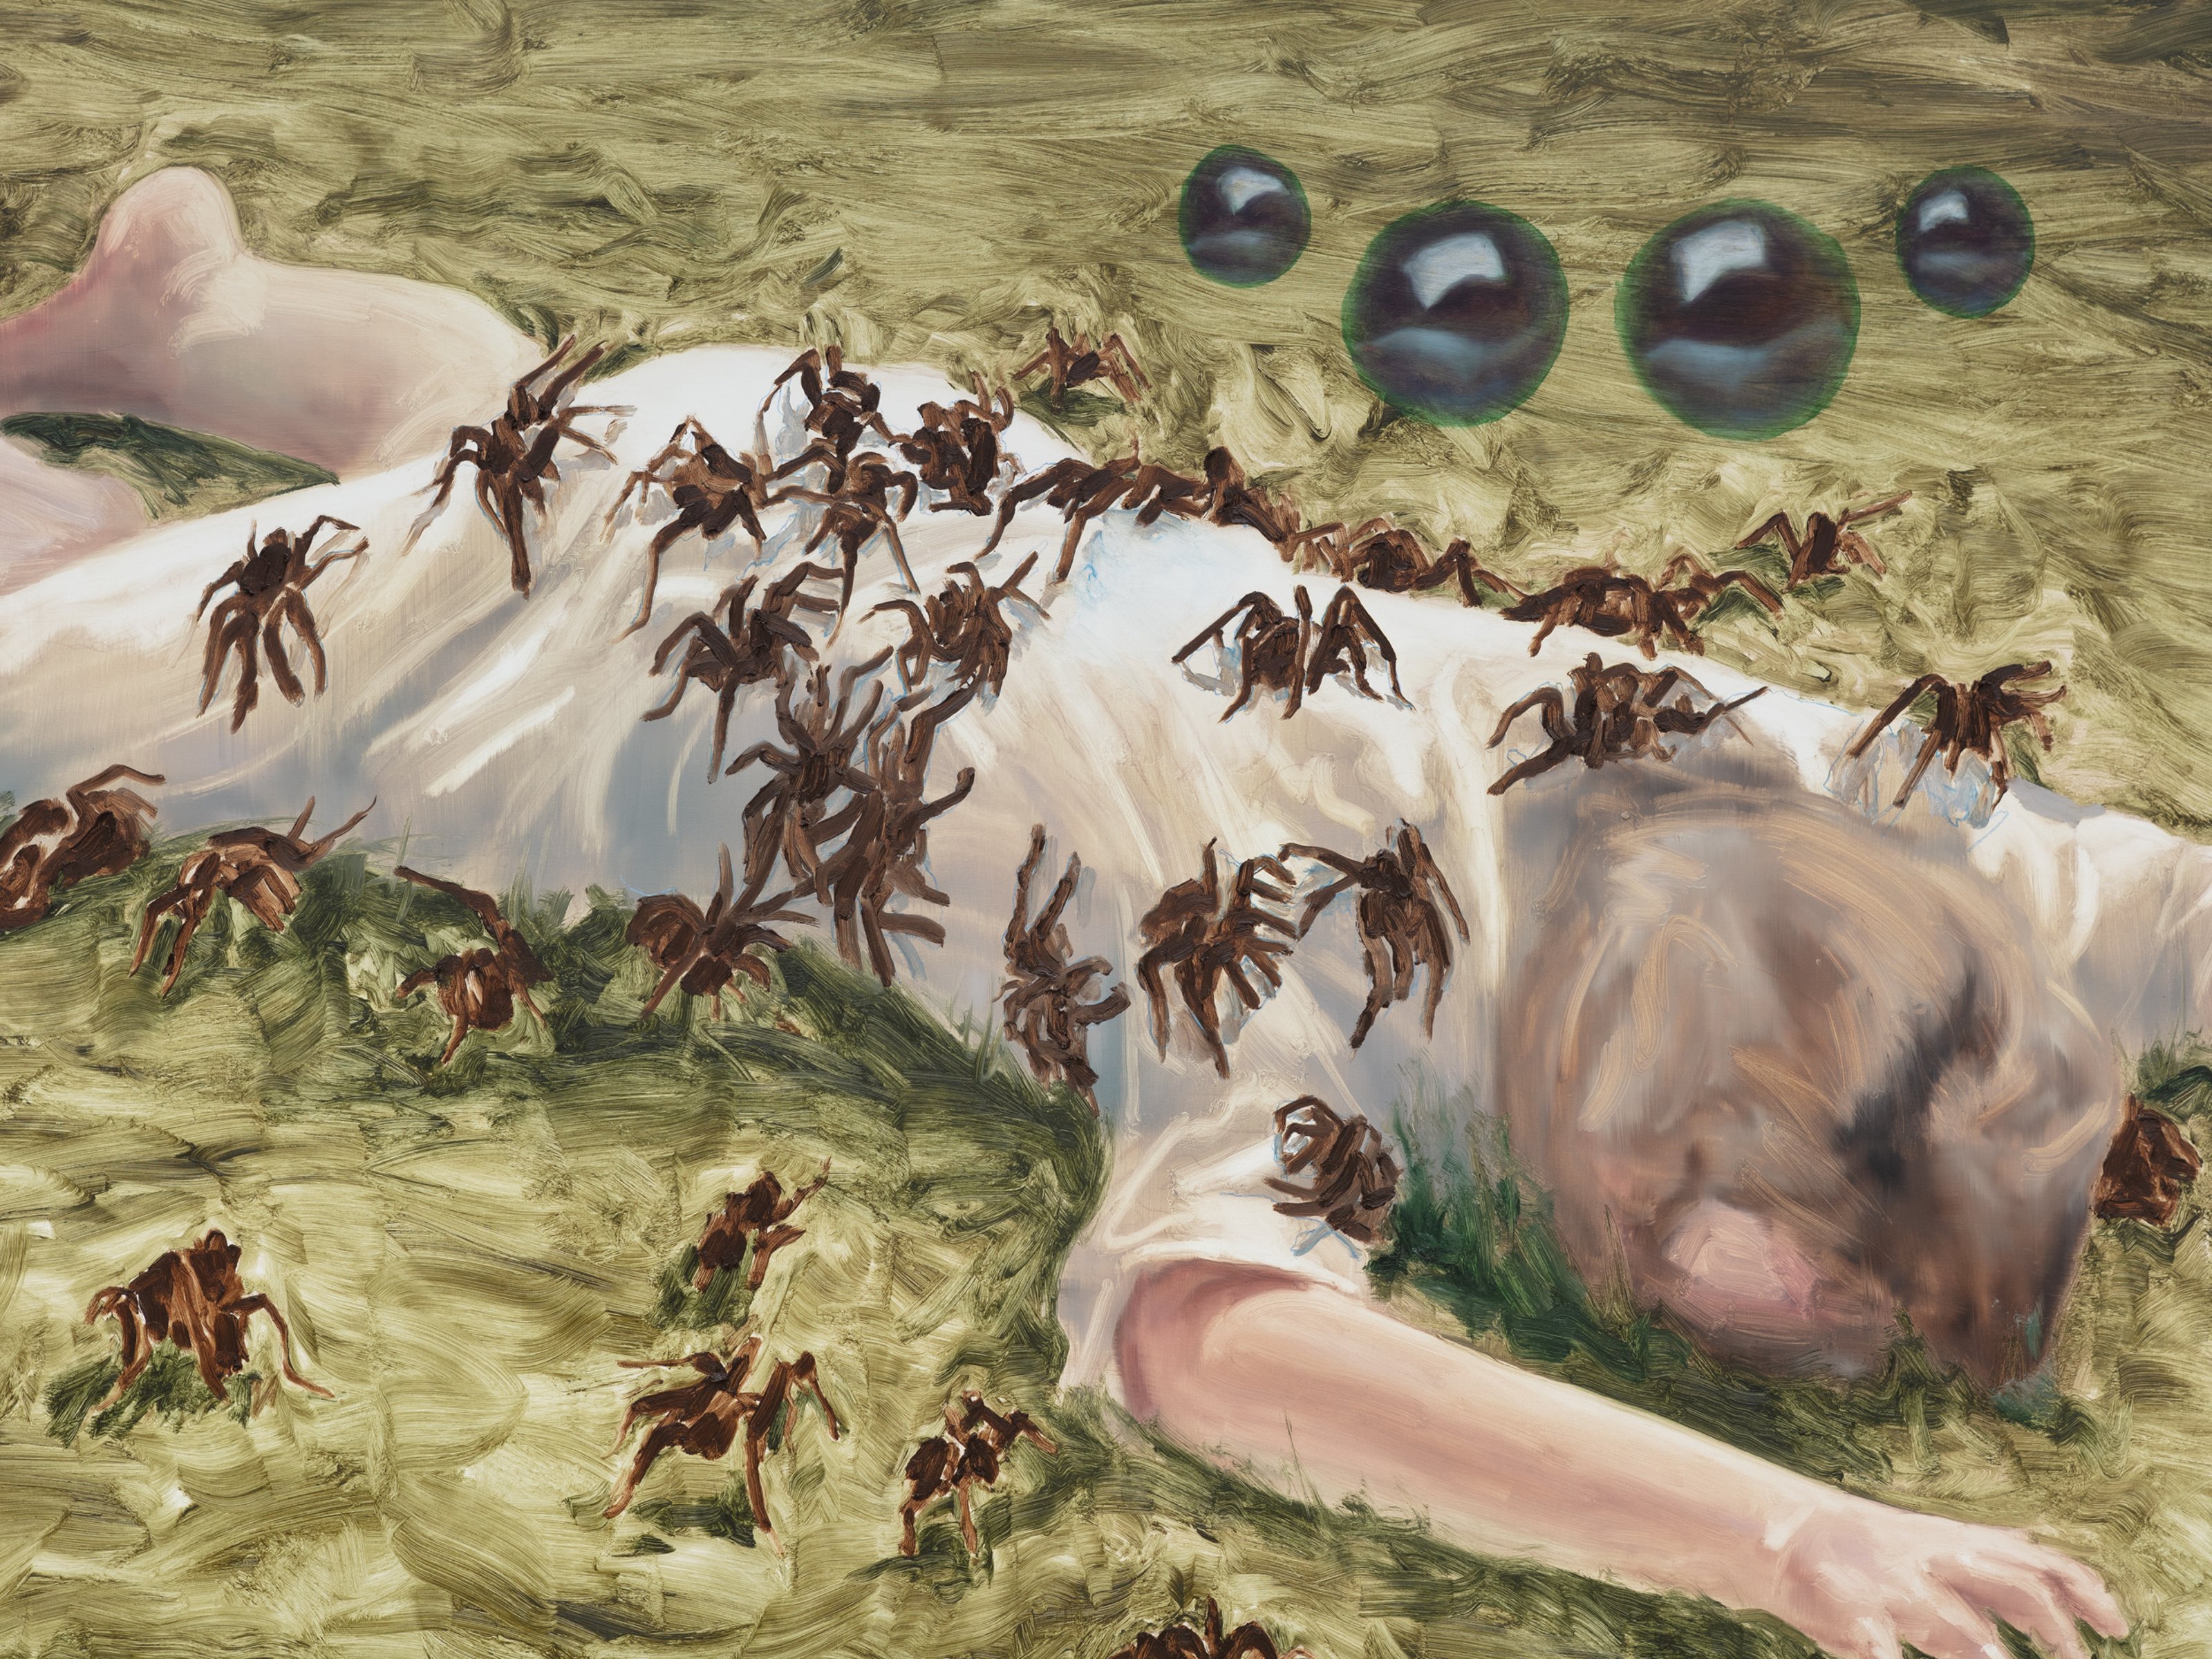 A figure in a white dress is lying face down on a straw-like yellow tone with large black spiders crawling on it.